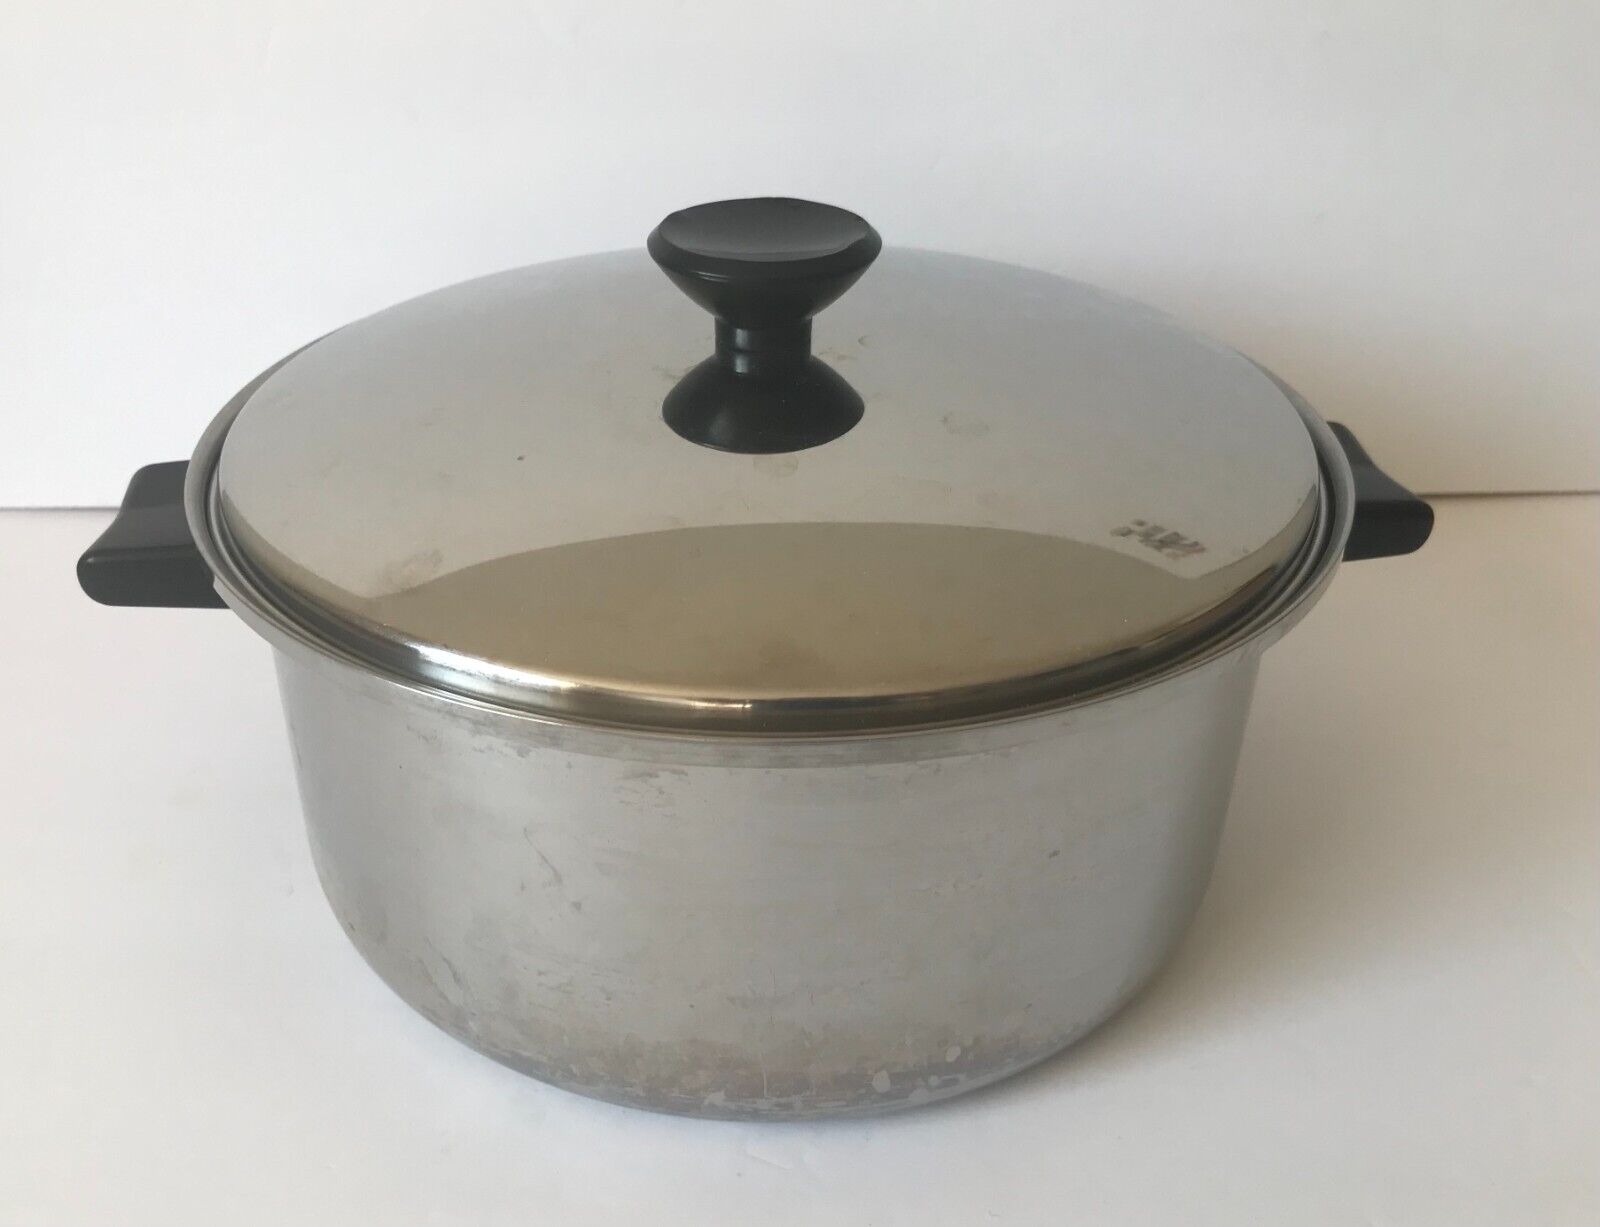 VTG Regal Ware 5 qt pot 3 ply 18-8 stainless steel preowned 